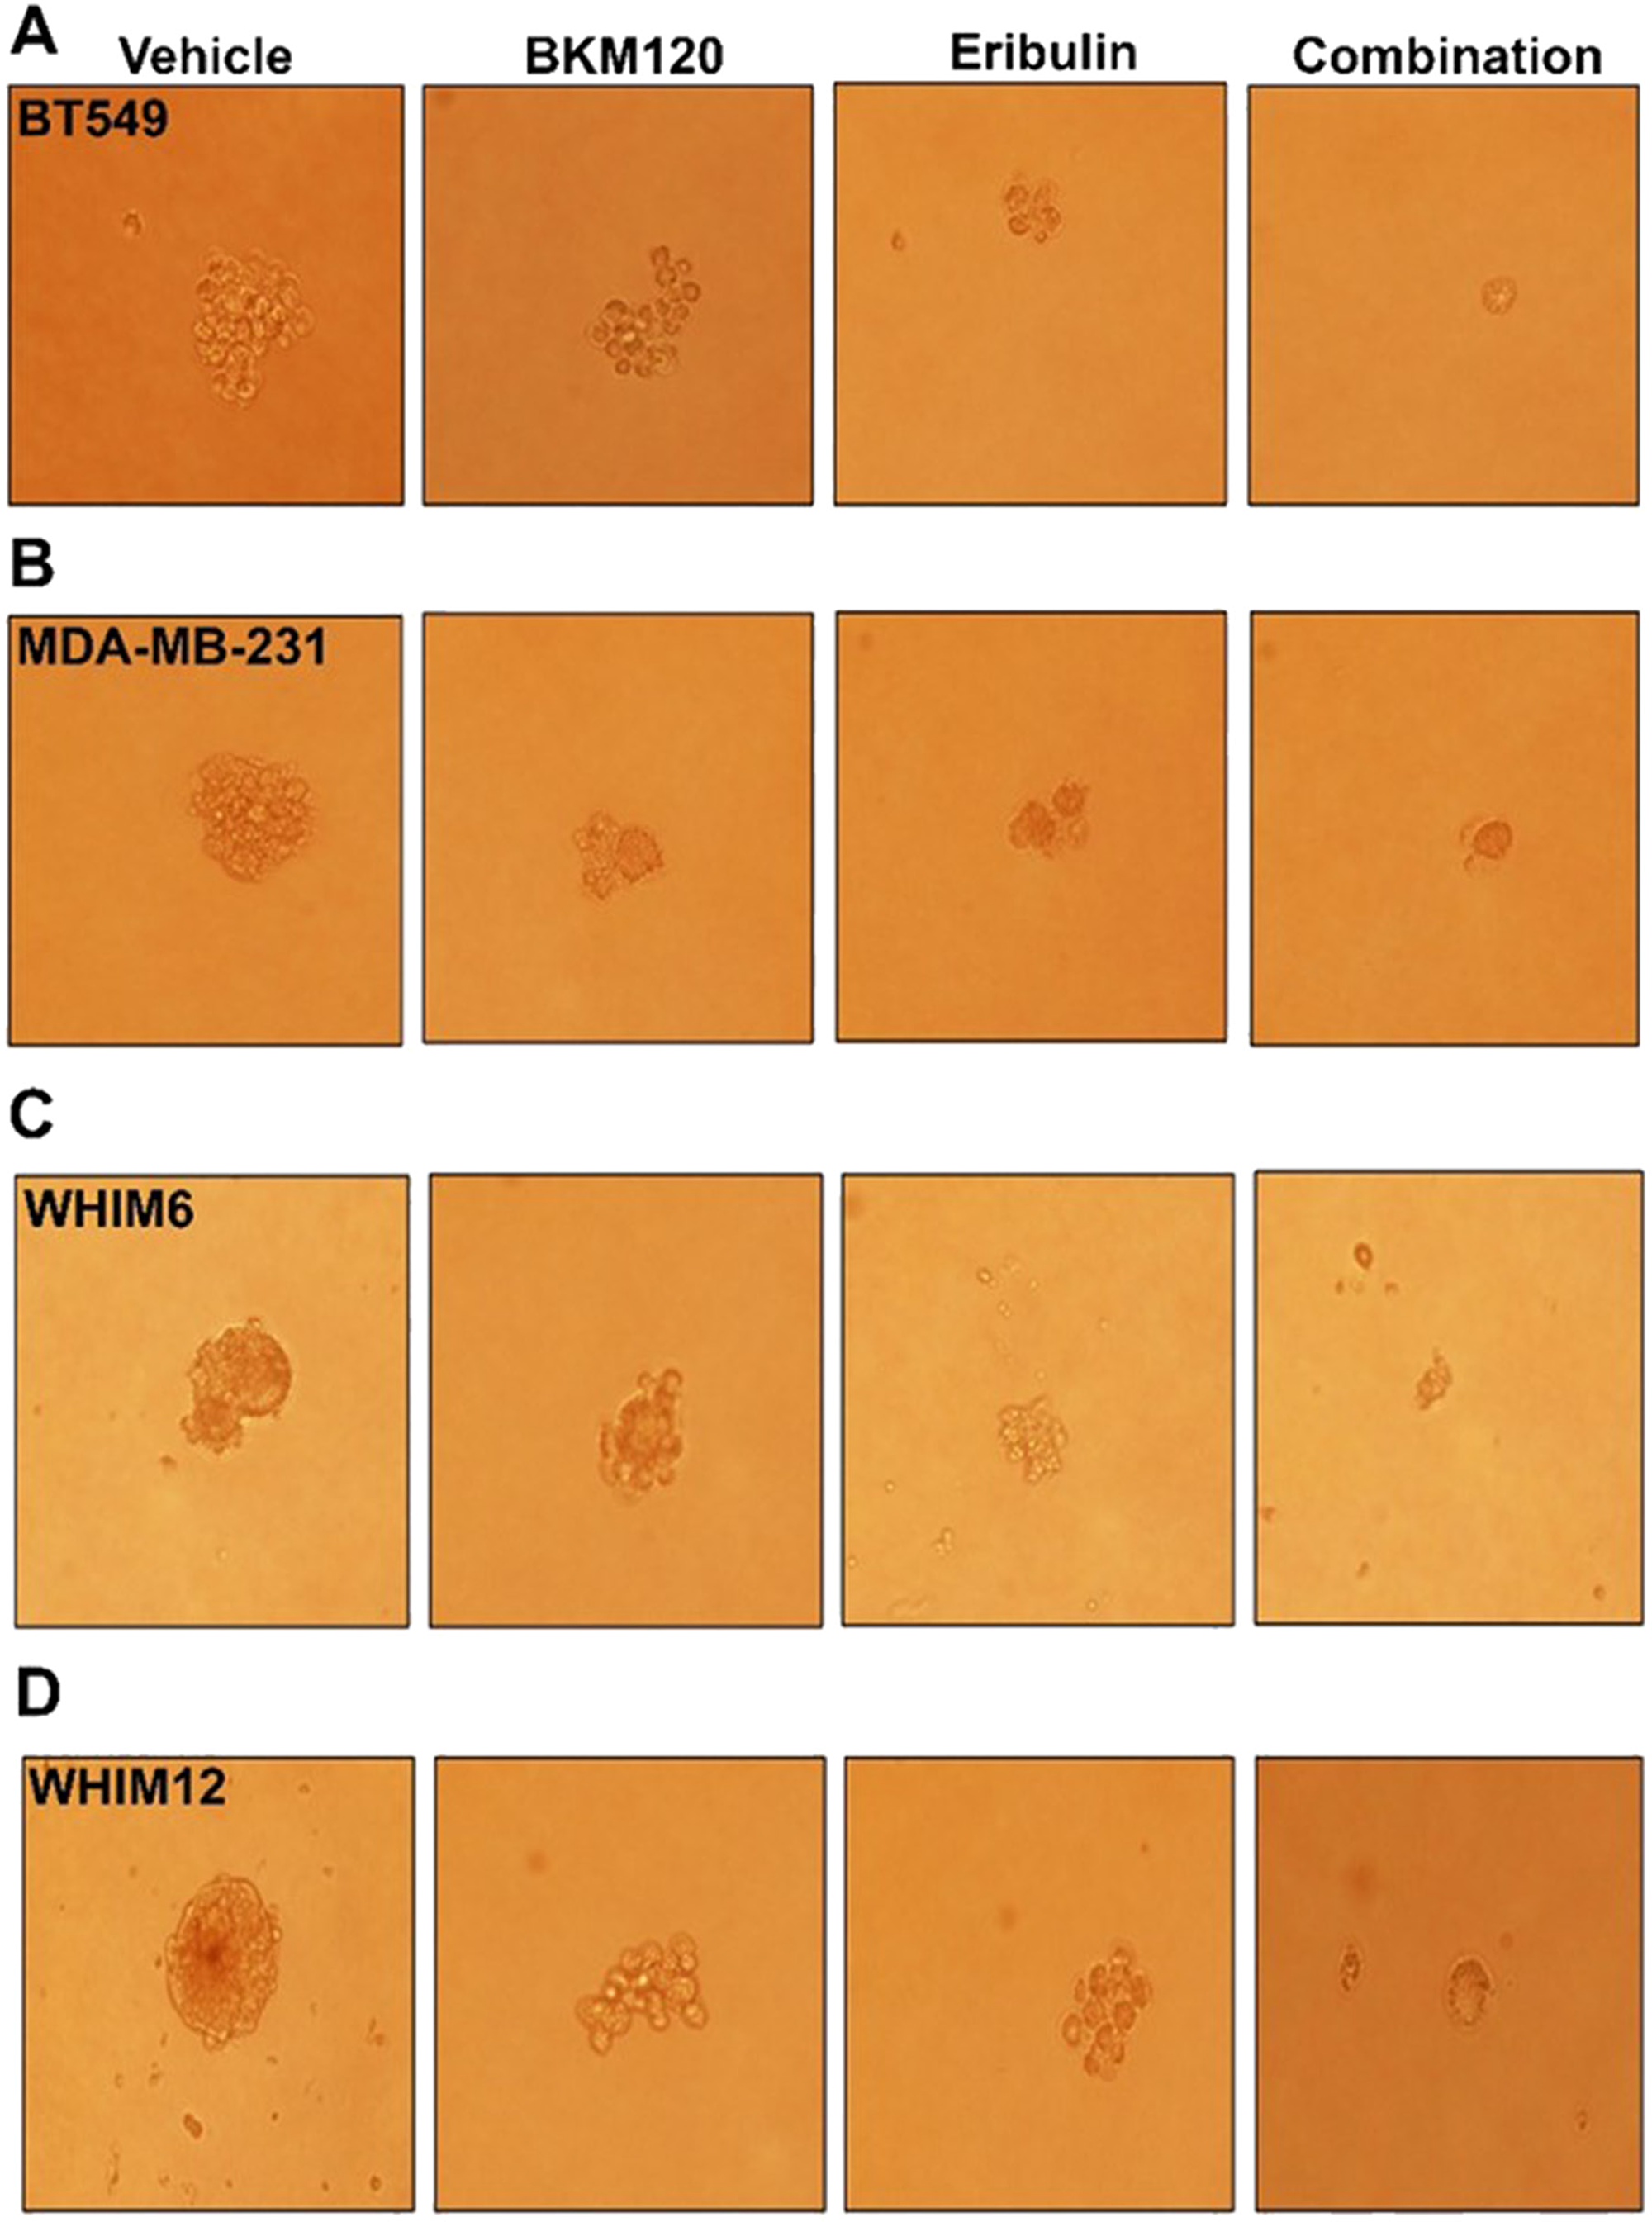 Eribulin alone or in combination with BKM120 inhibited mammosphere formation in TNBC cell lines in vitro.